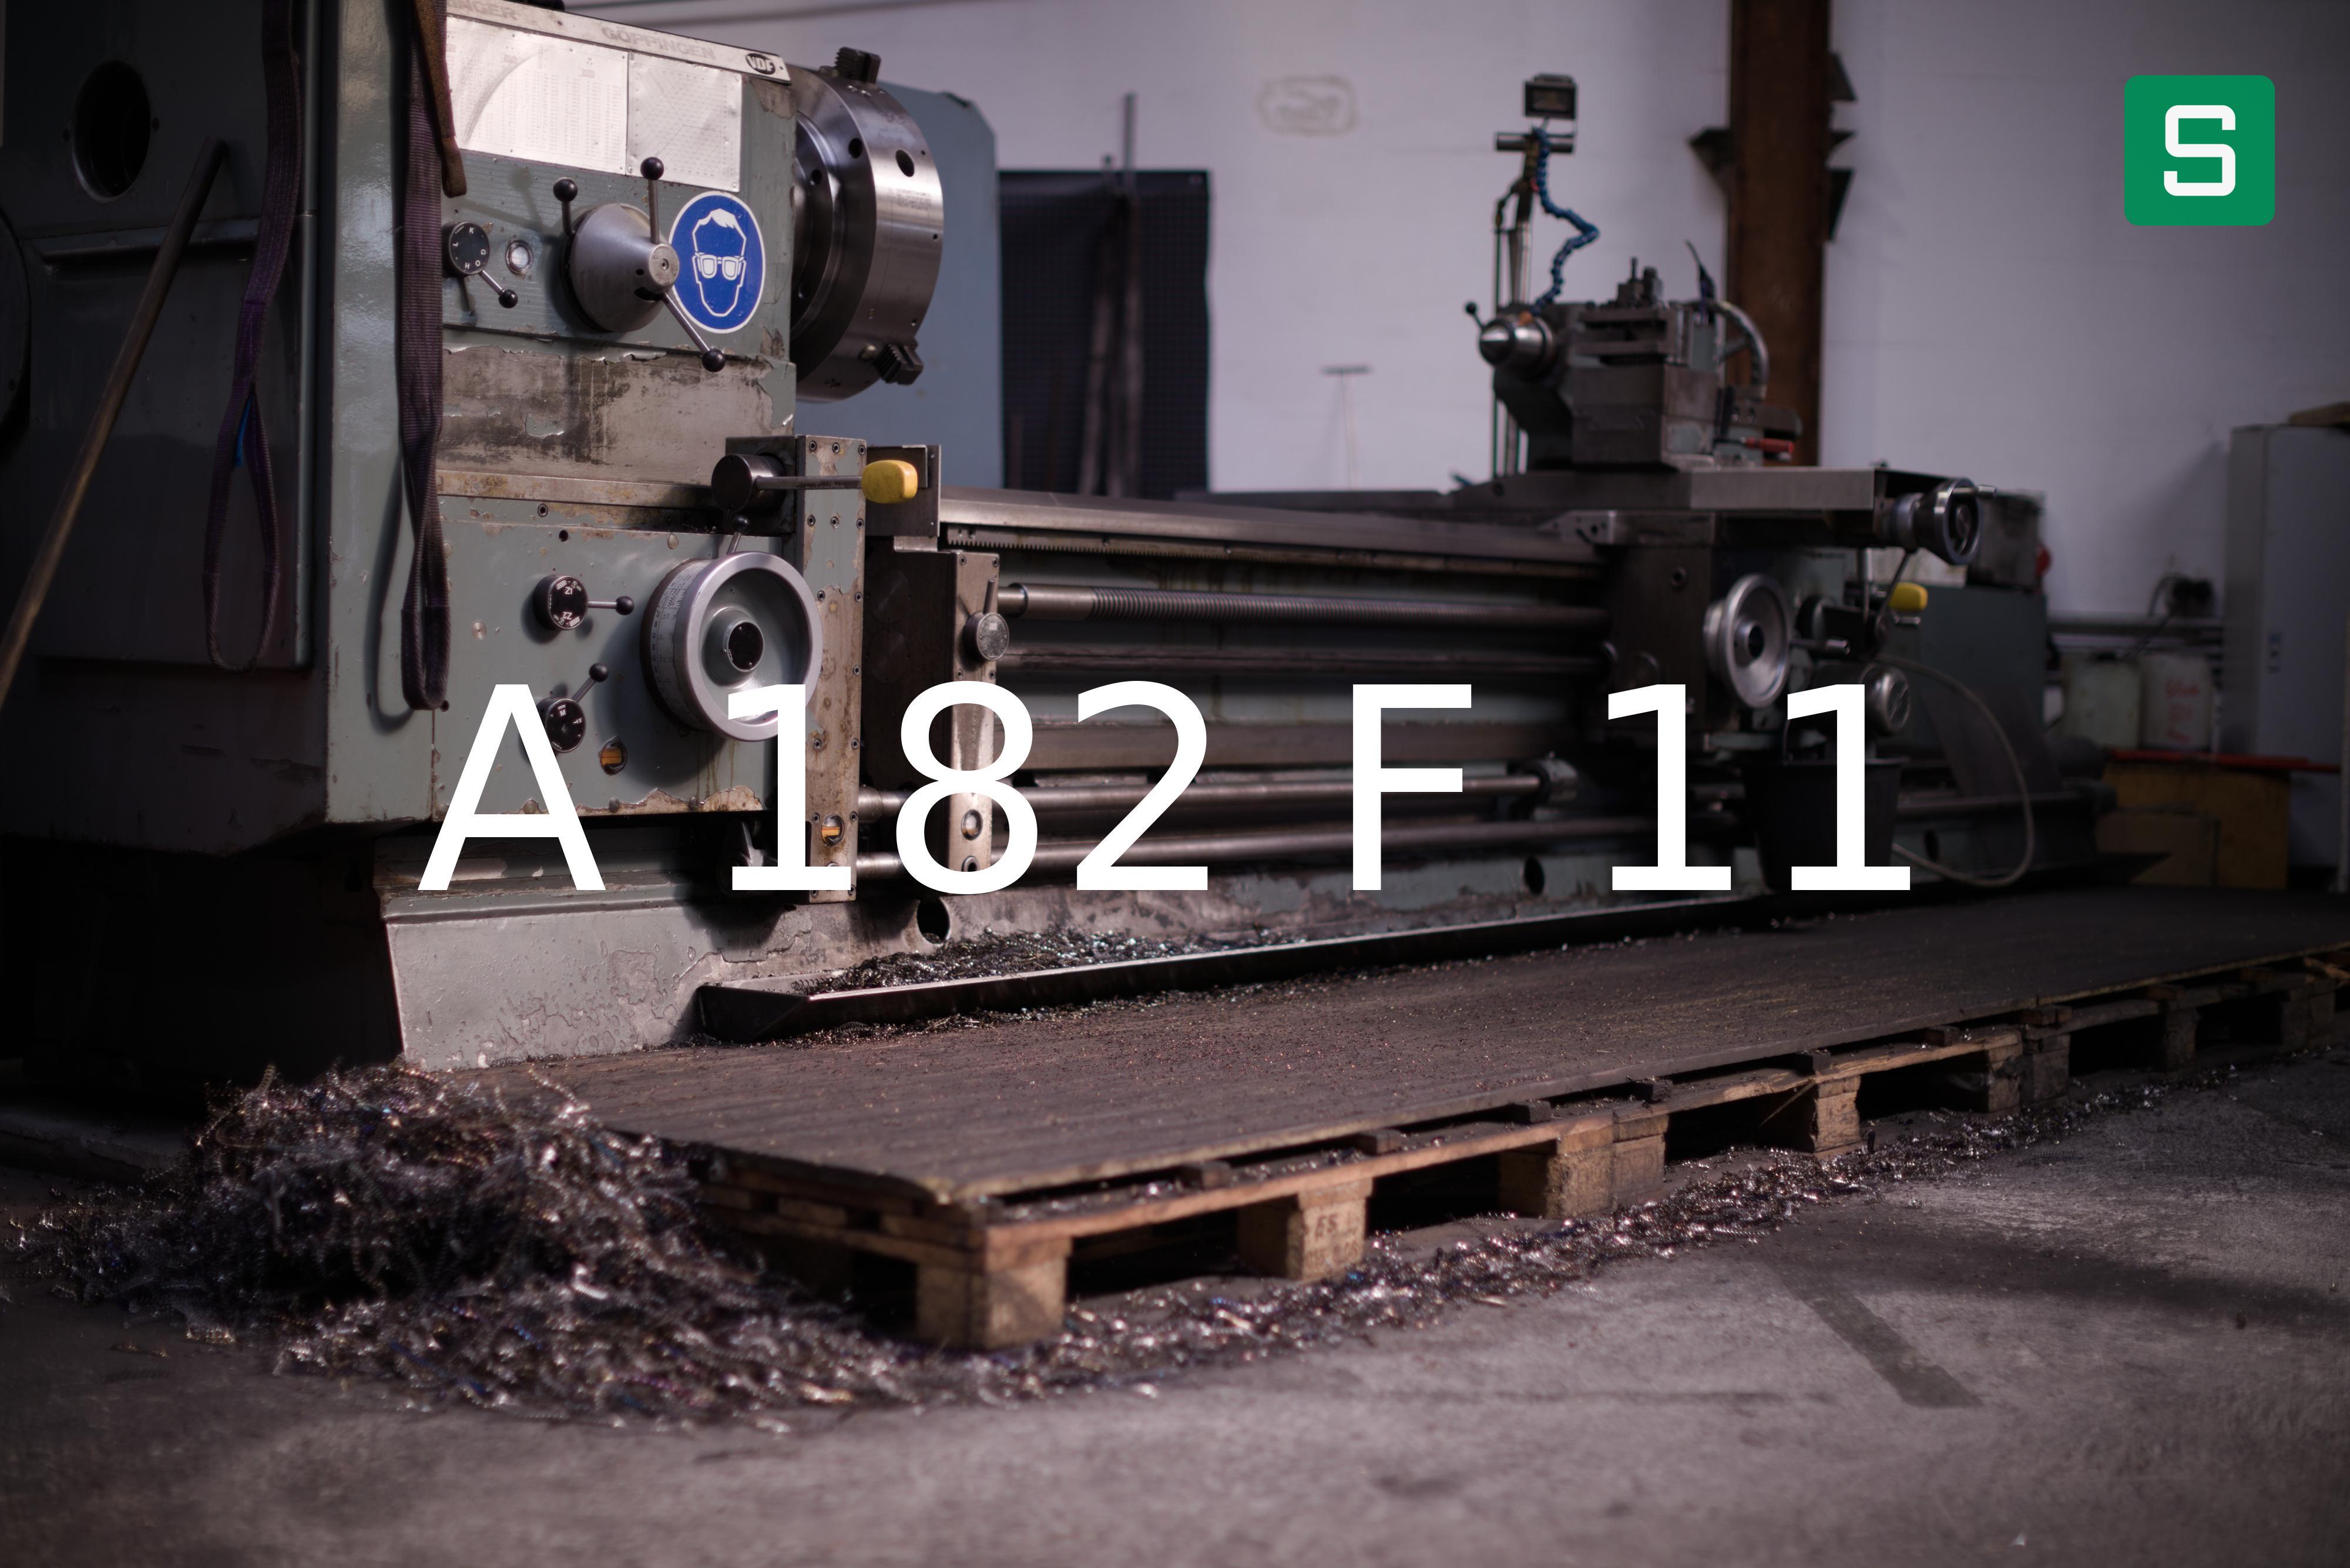 Steel Material: A 182 F 11